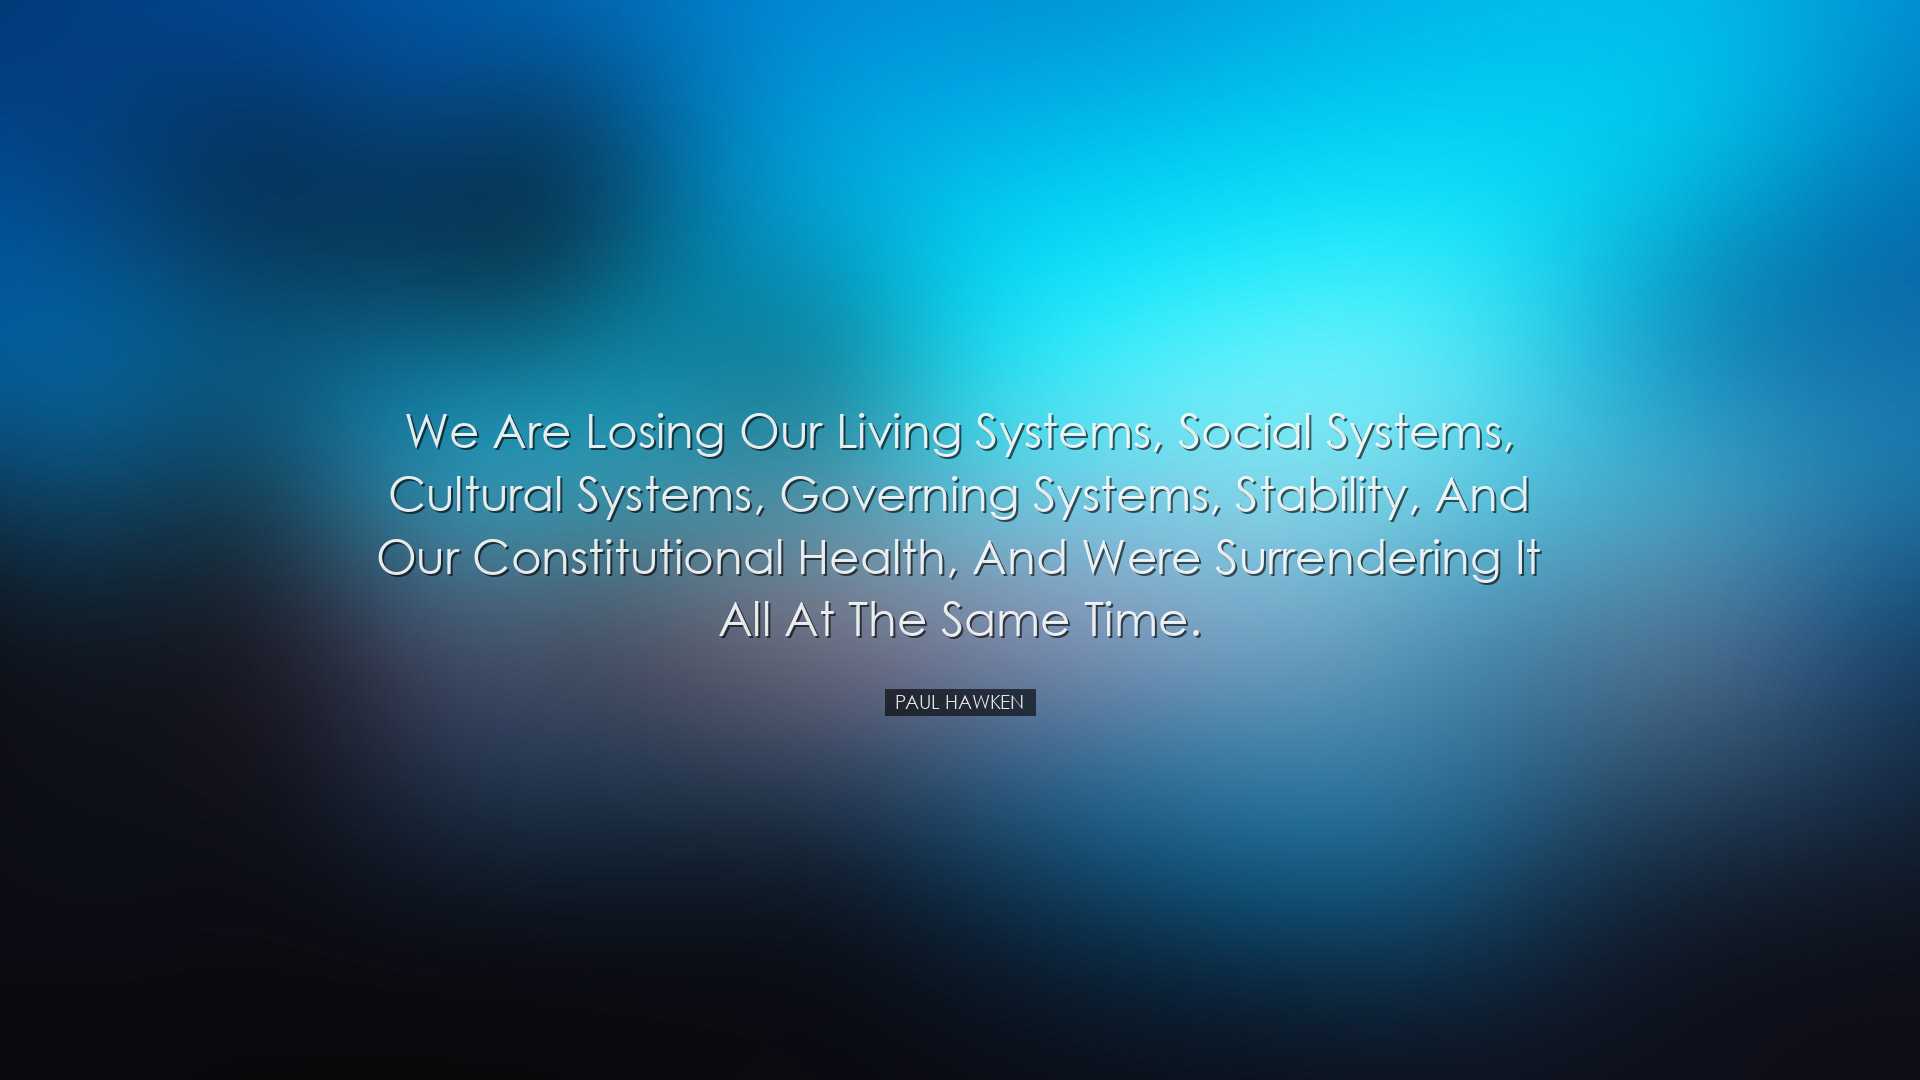 We are losing our living systems, social systems, cultural systems